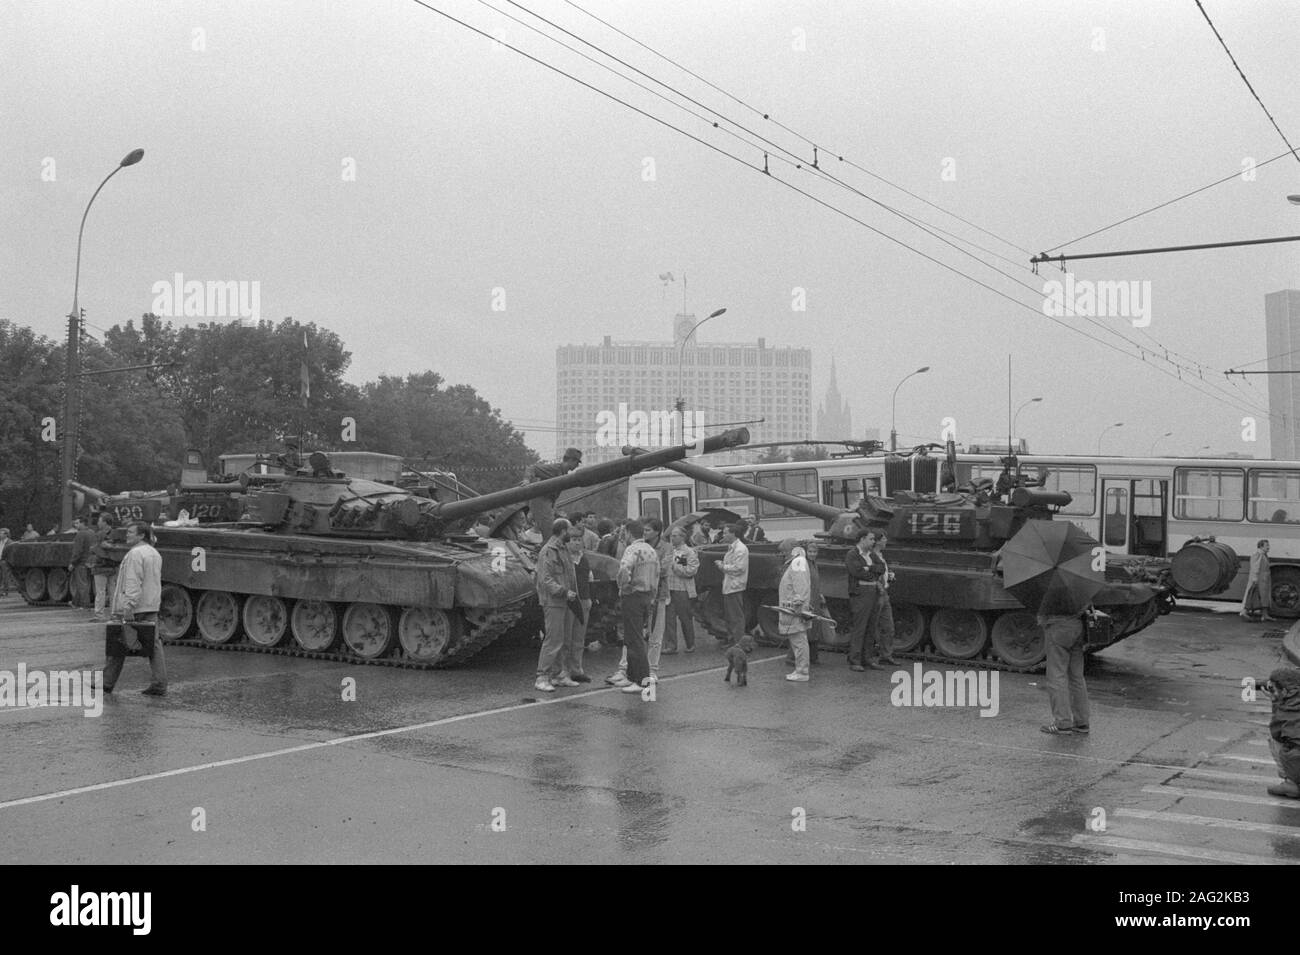 Moscow, USSR - August 21, 1991: People, barricades and tanks on  Novoarbatskiy bridge during days of coup d'etat Stock Photo - Alamy